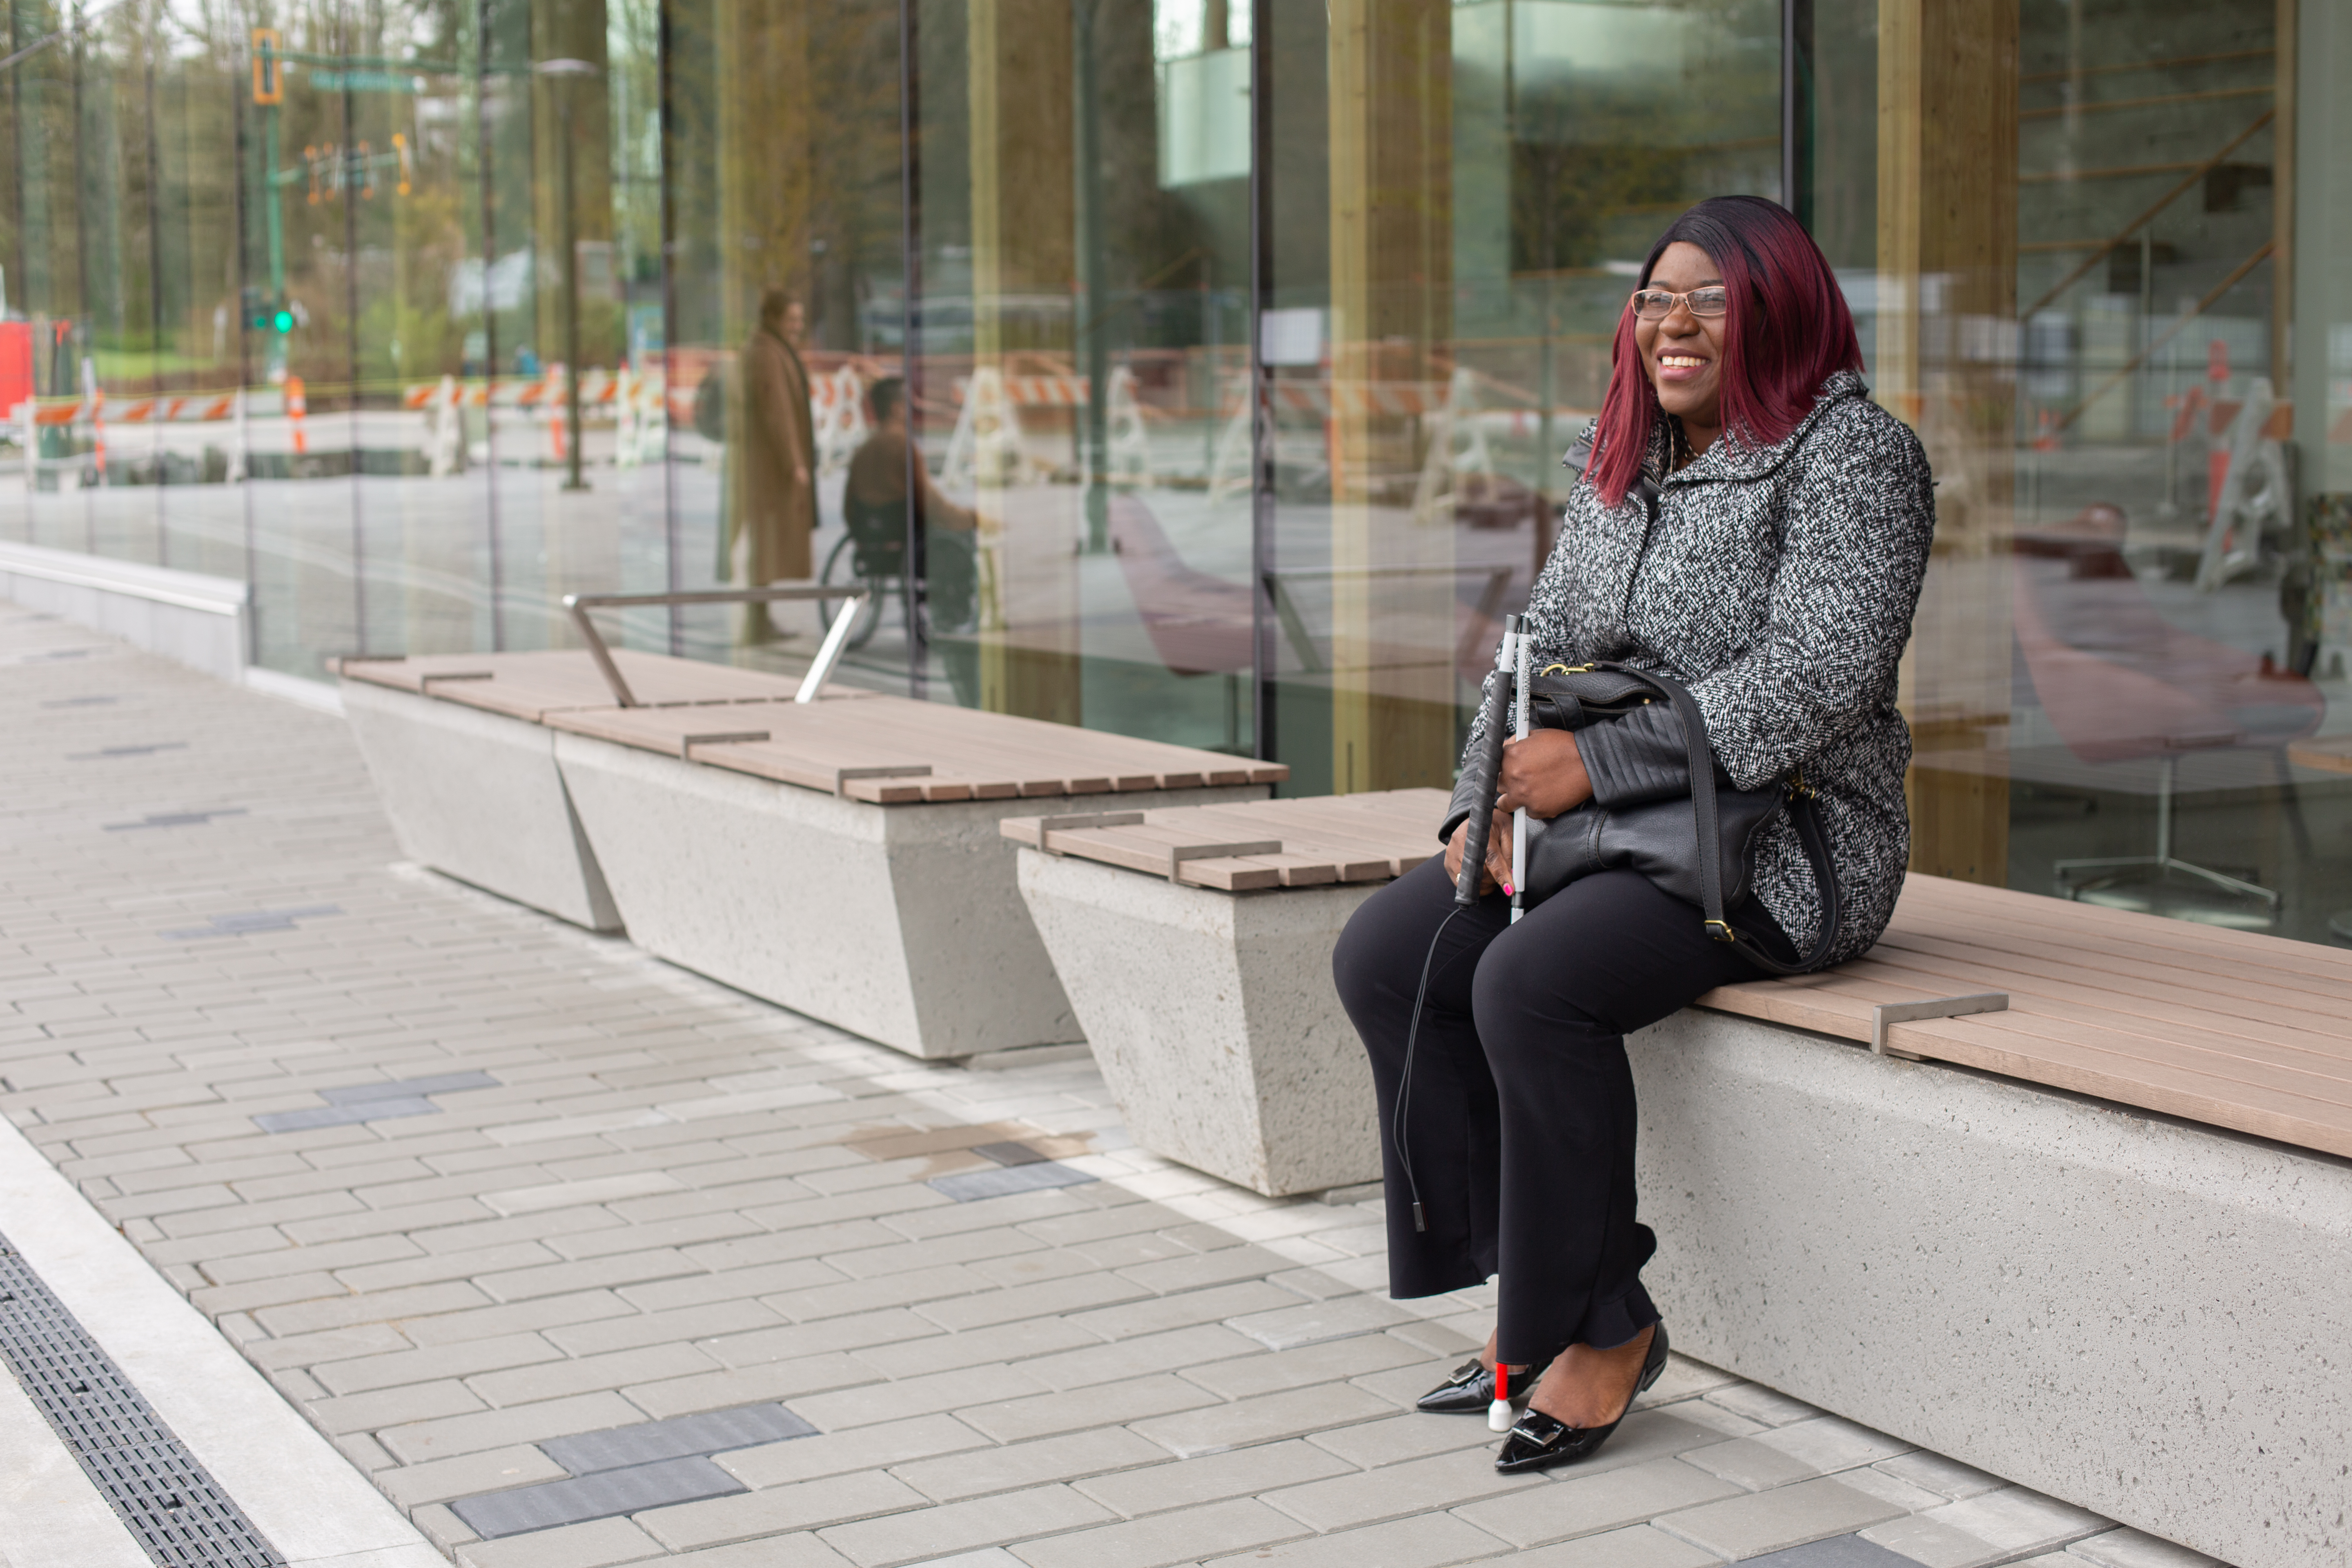 Laetitia Mfamobani smiling and sitting on a building bench outside wearing a black and white jacket and black pants. She has long pink and black hair and has a white cane.